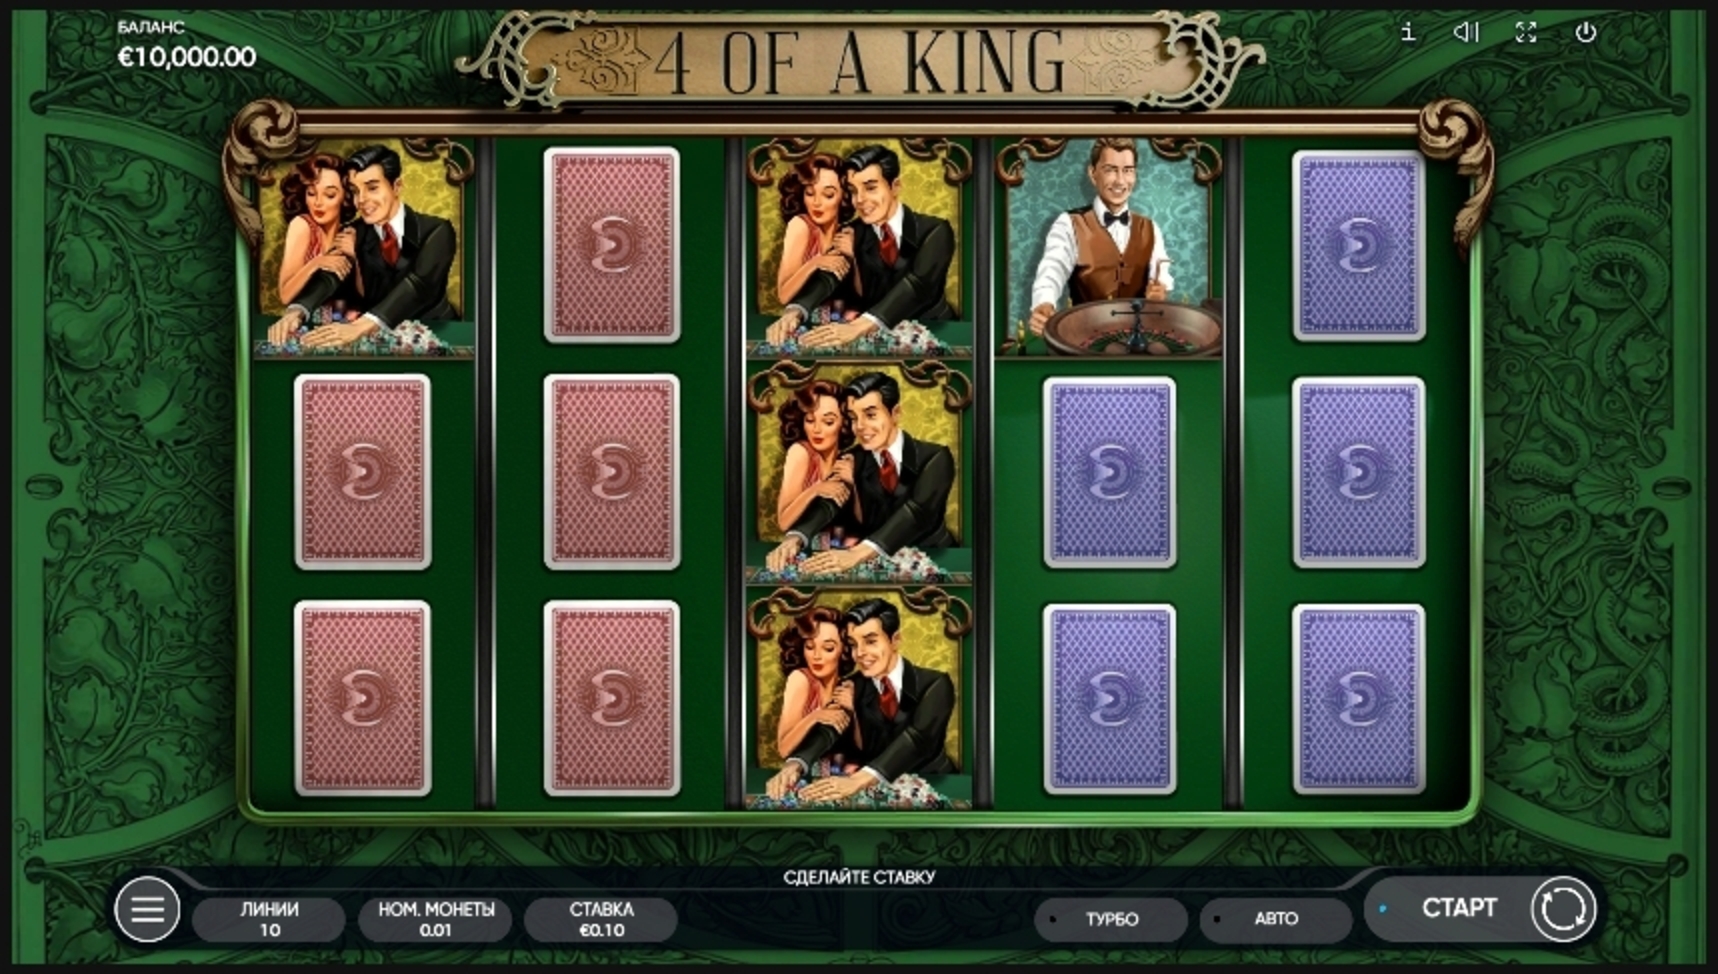 Reels in 4 of a King Slot Game by Endorphina